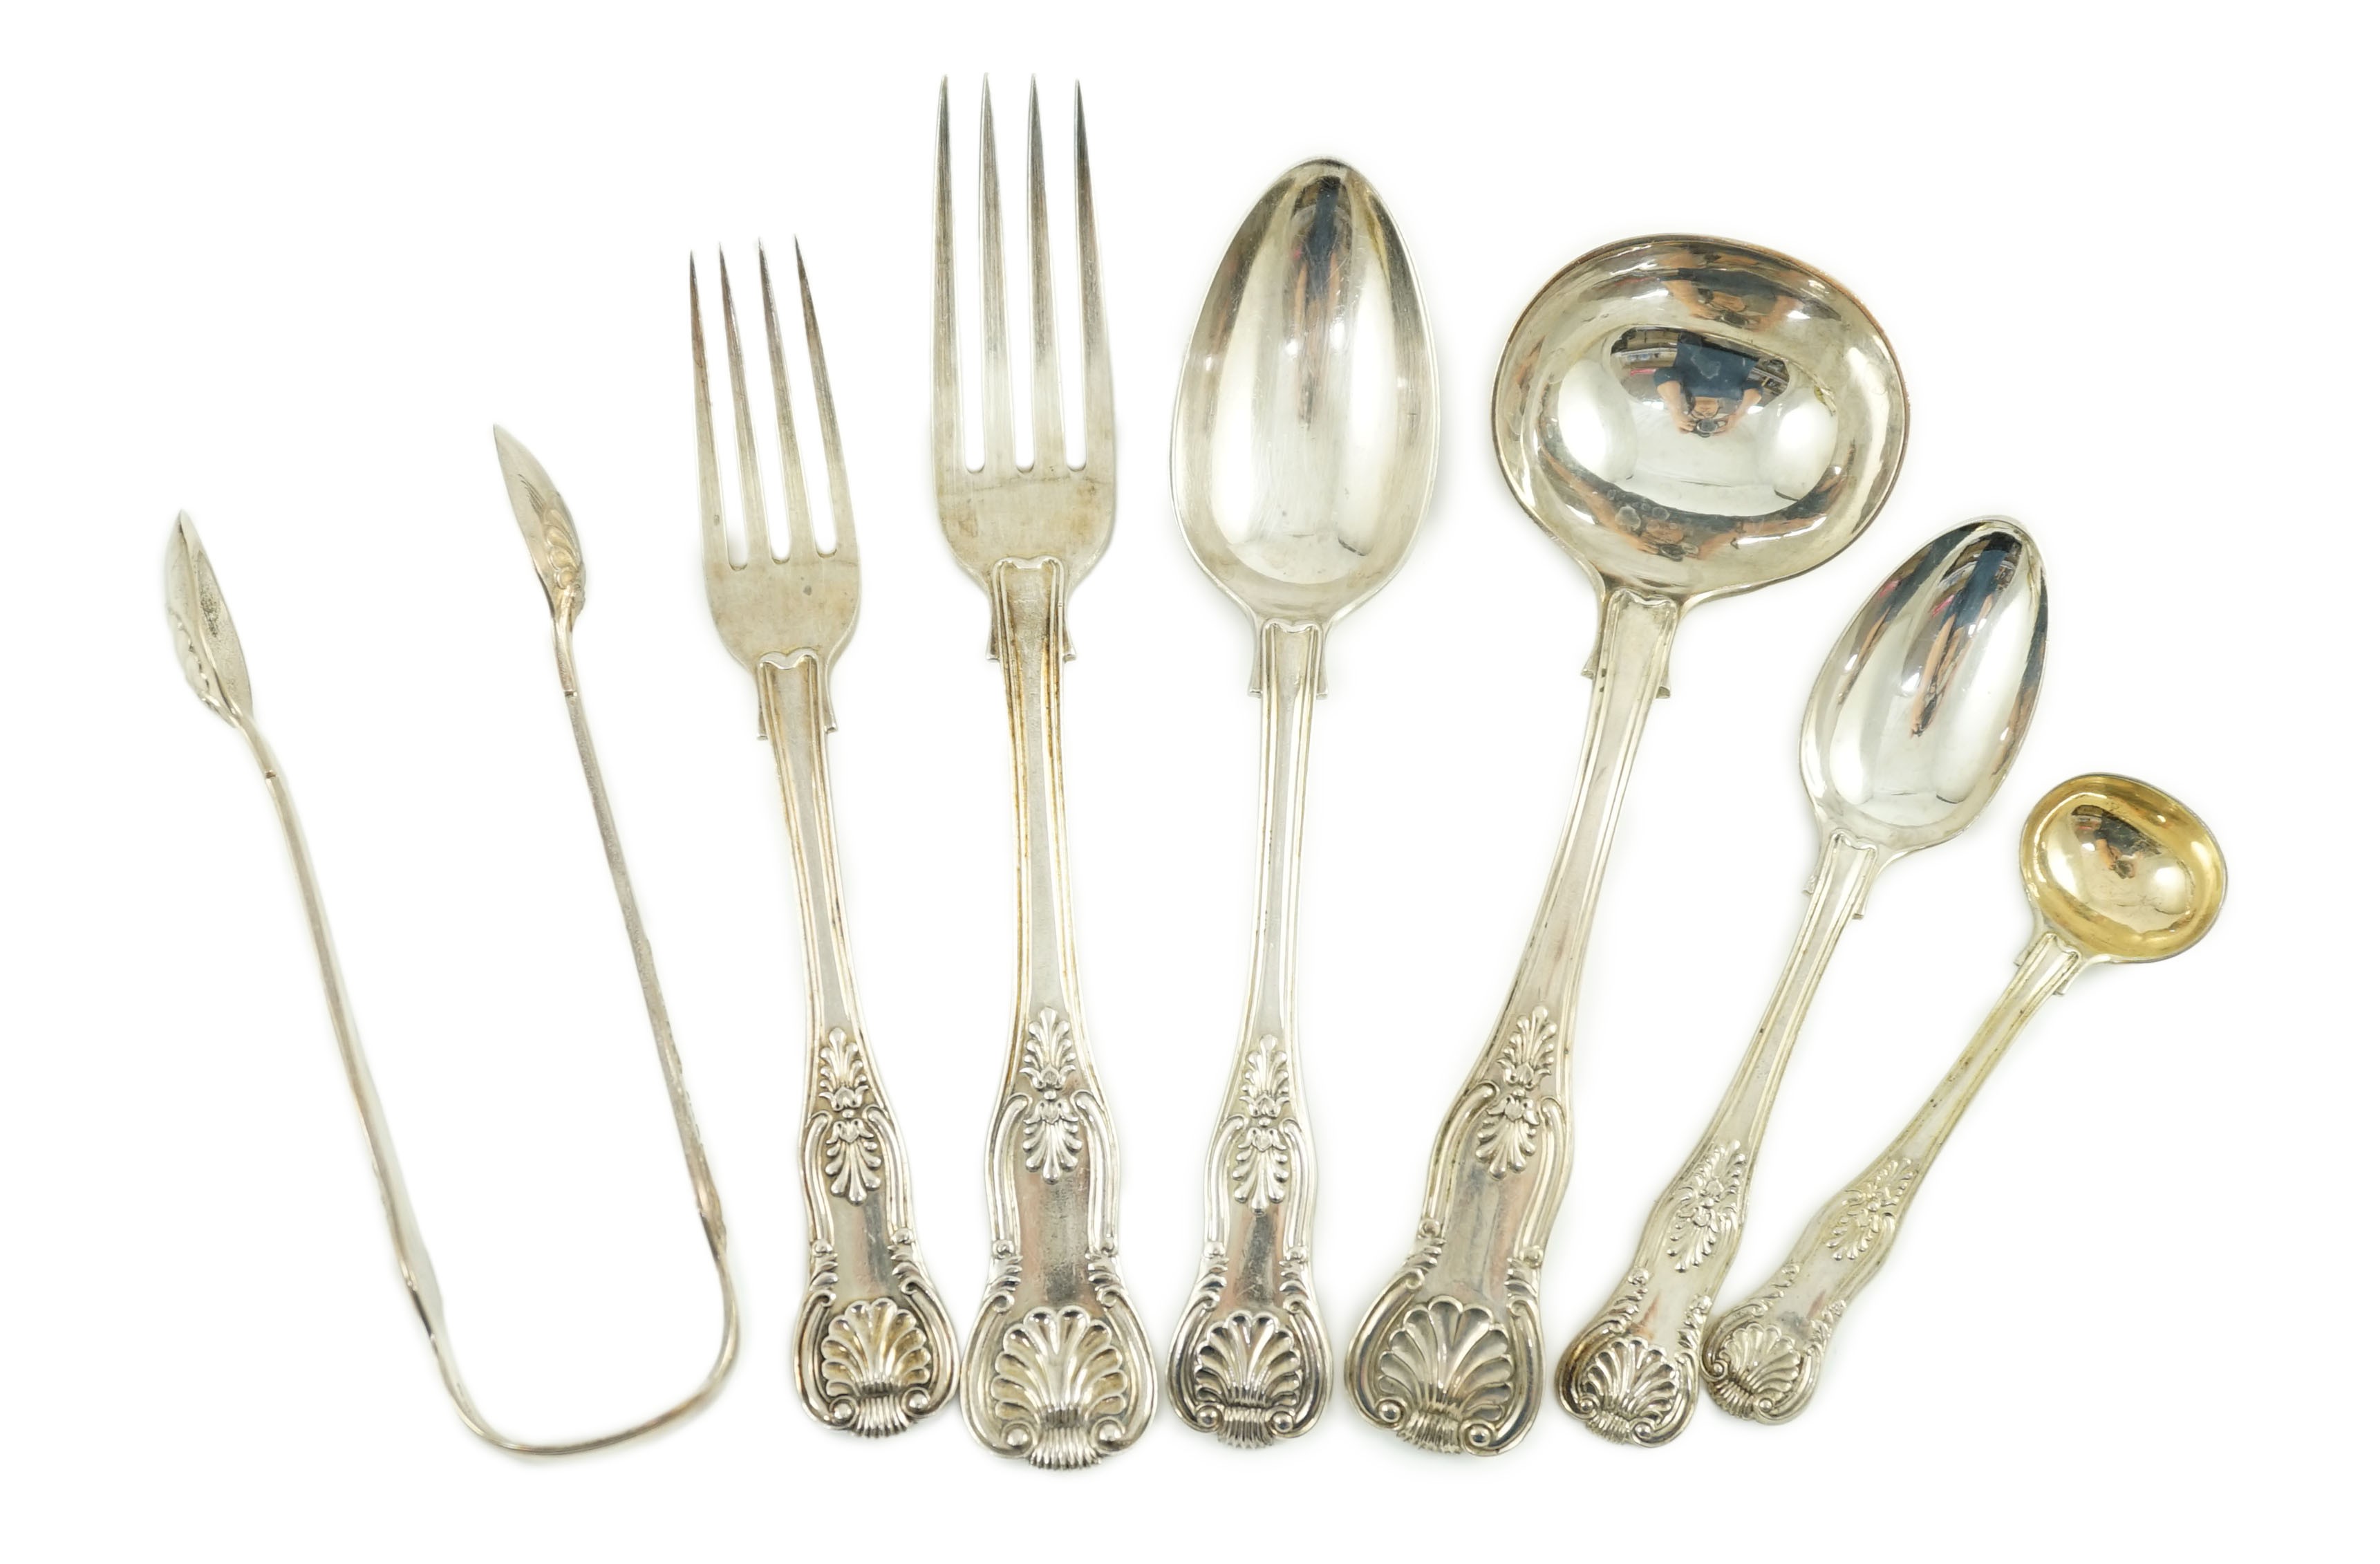 An early Victorian silver canteen of Kings pattern cutlery, by William Bateman